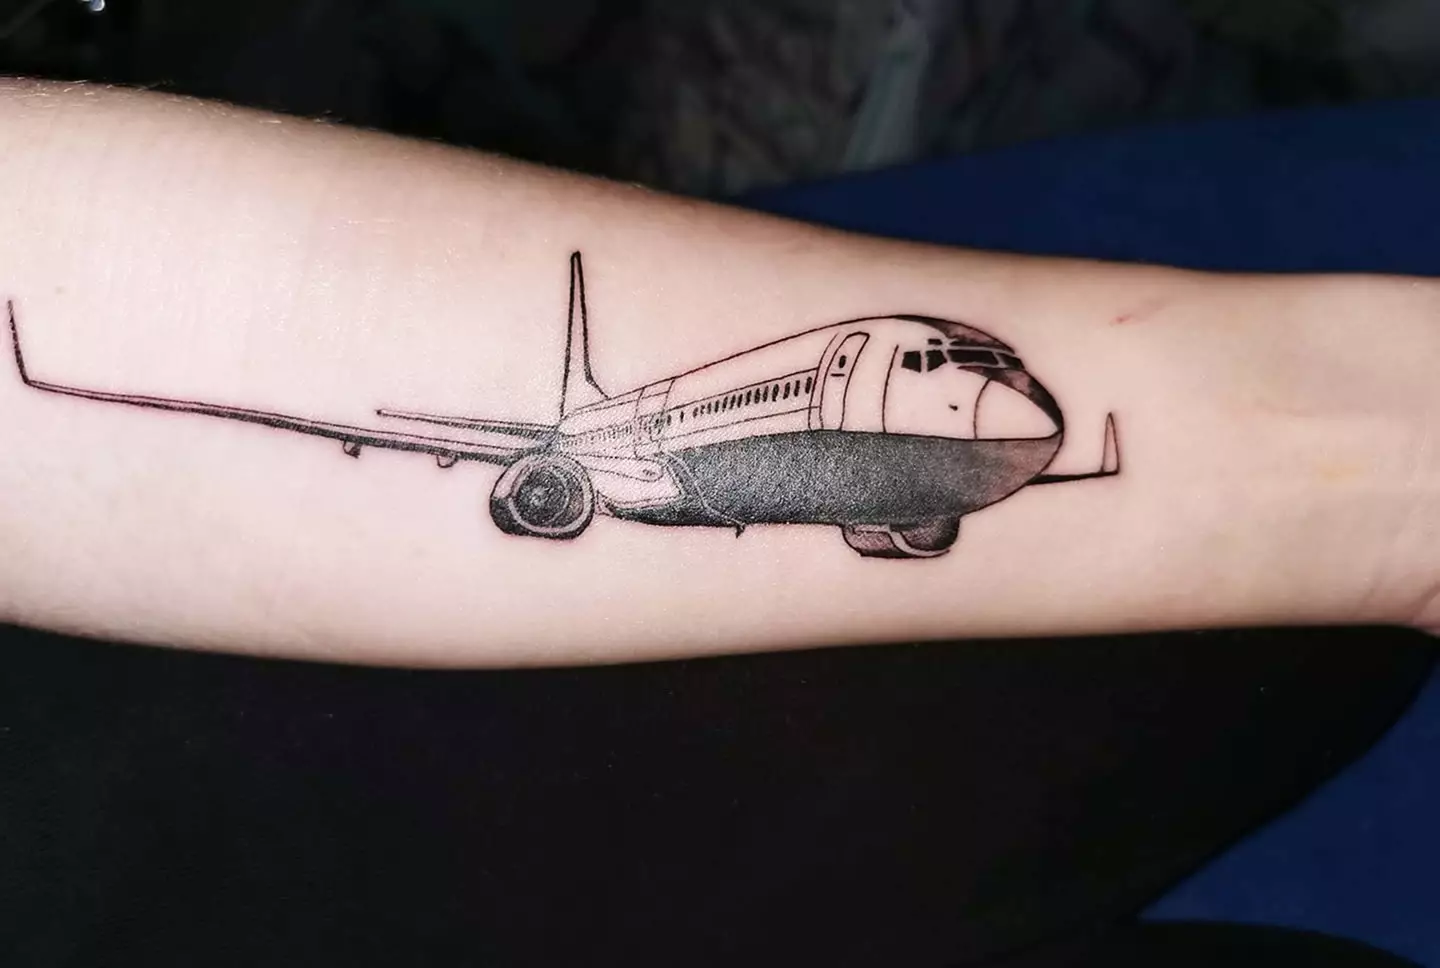 Sarah even has two tattoos of her plane 'boyfriend'.